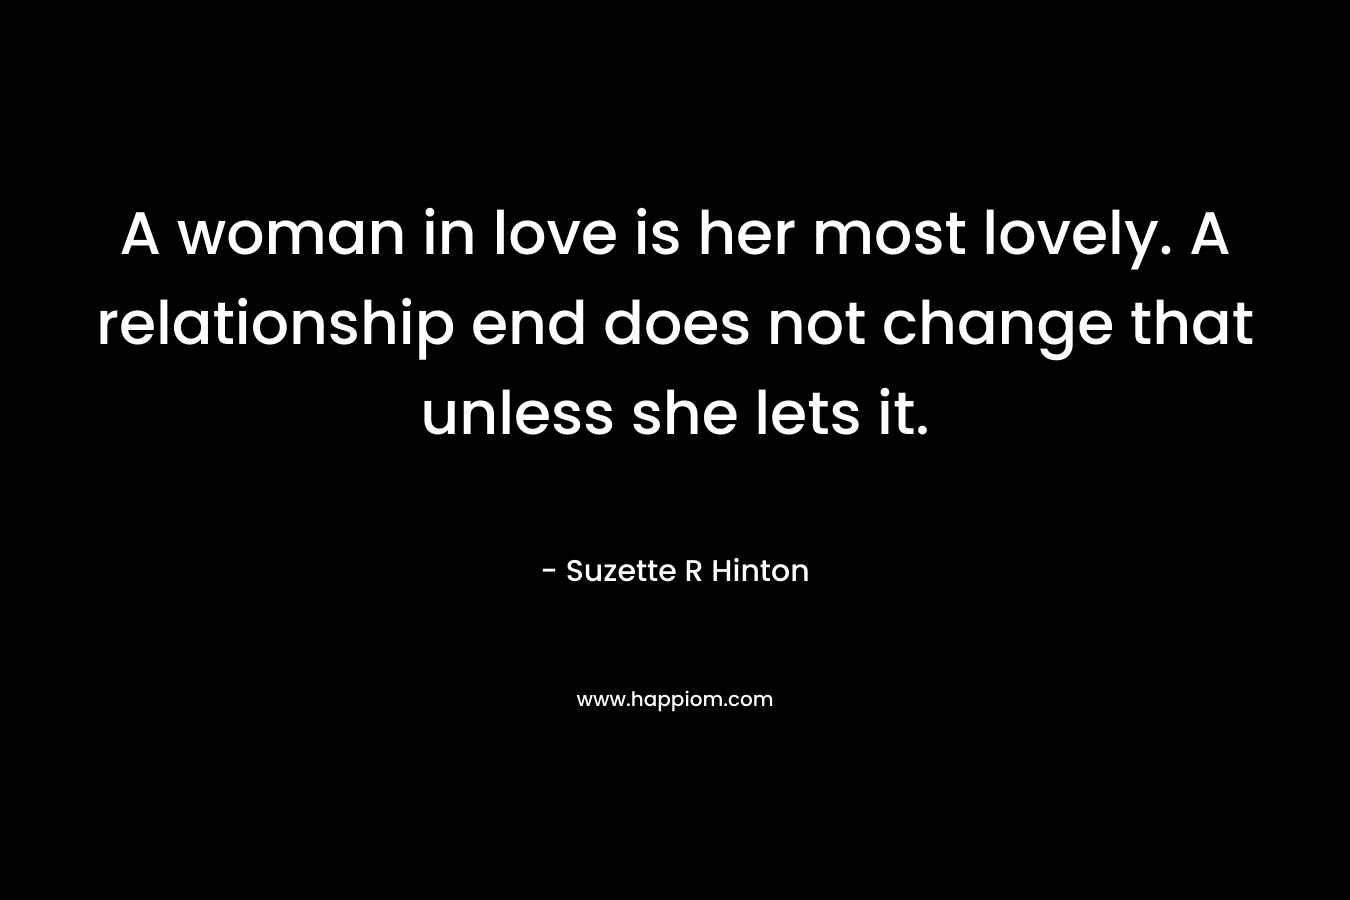 A woman in love is her most lovely. A relationship end does not change that unless she lets it.